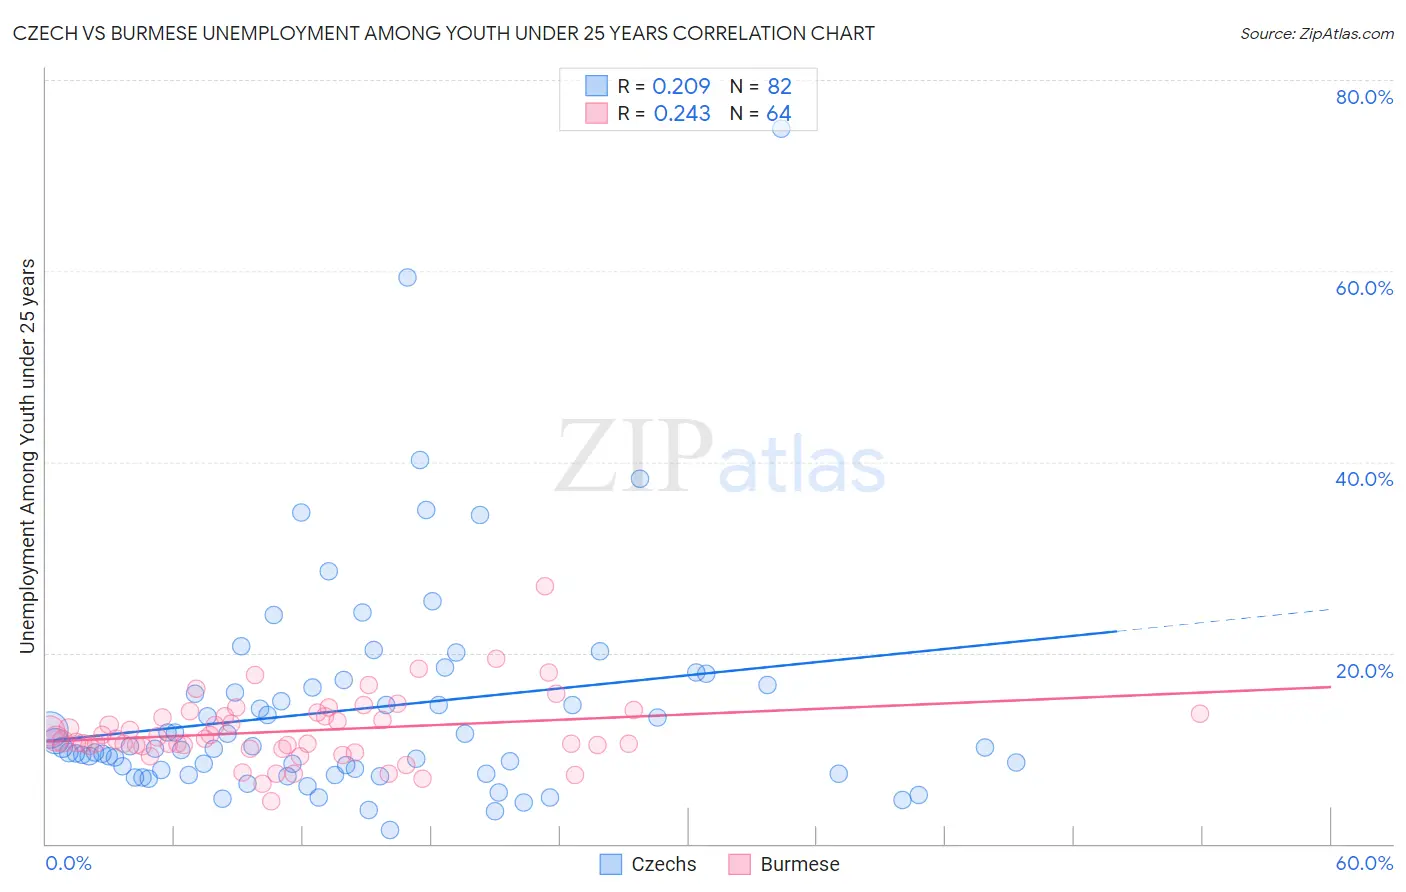 Czech vs Burmese Unemployment Among Youth under 25 years